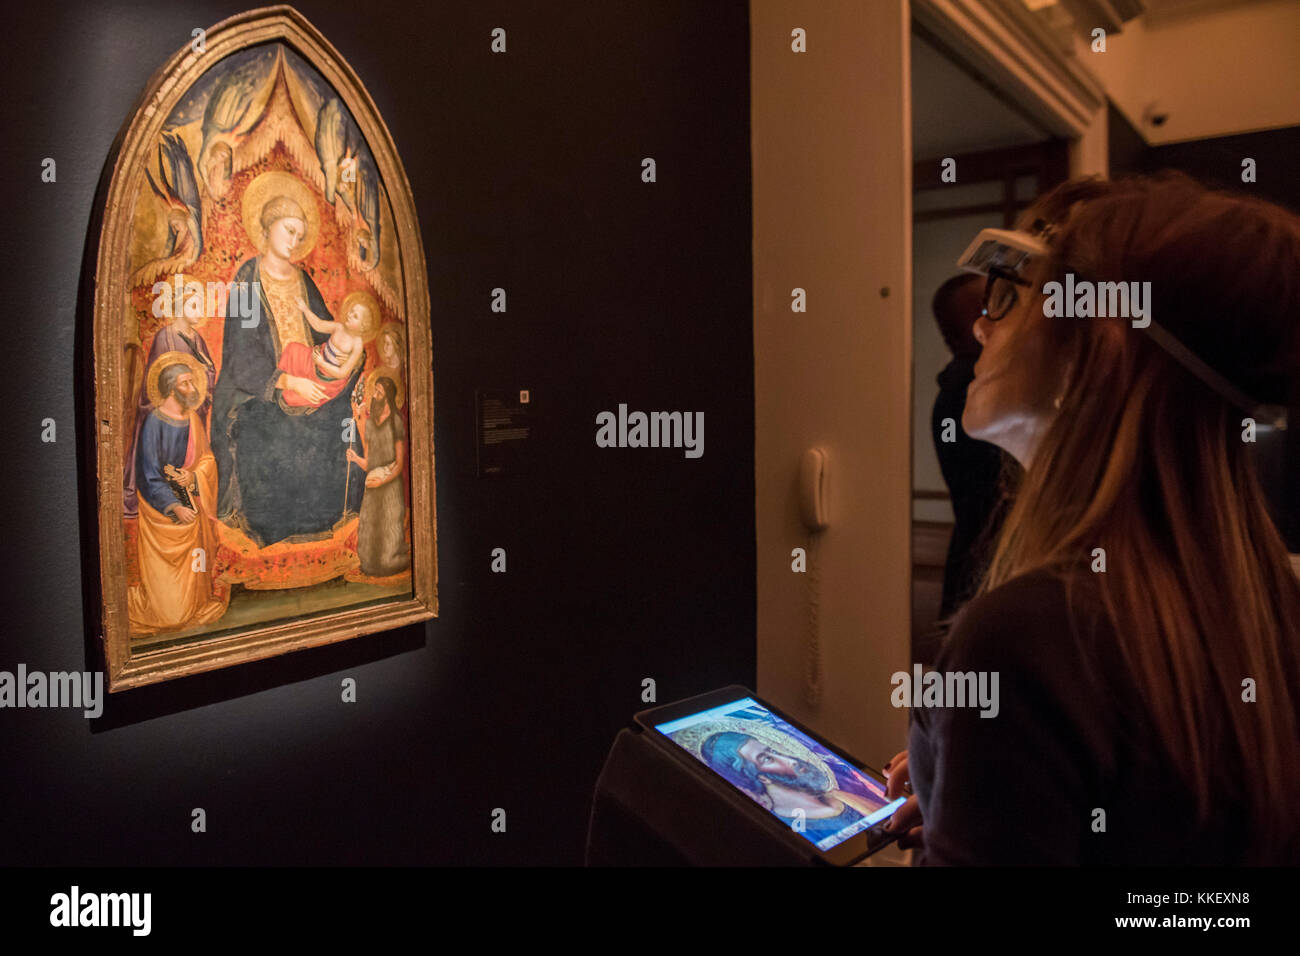 London, UK. 1st December, 2017. Mariotto di Nardo, THE MADONNA AND CHILD ENTHRONED, WITH SAINT PETER, SAINT JOHN THE BAPTIST, SAINT CATHERINE OF ALEXANDRIA AND ONE OTHER FEMALE SAINT AND ANGELS, £200,000-300,000 - London Old Masters Evening sale exhibition at Sotheby's New Bond Street. The sale takes palce on 6 December 2017 covers 400 years of art history. Credit: Guy Bell/Alamy Live News Stock Photo